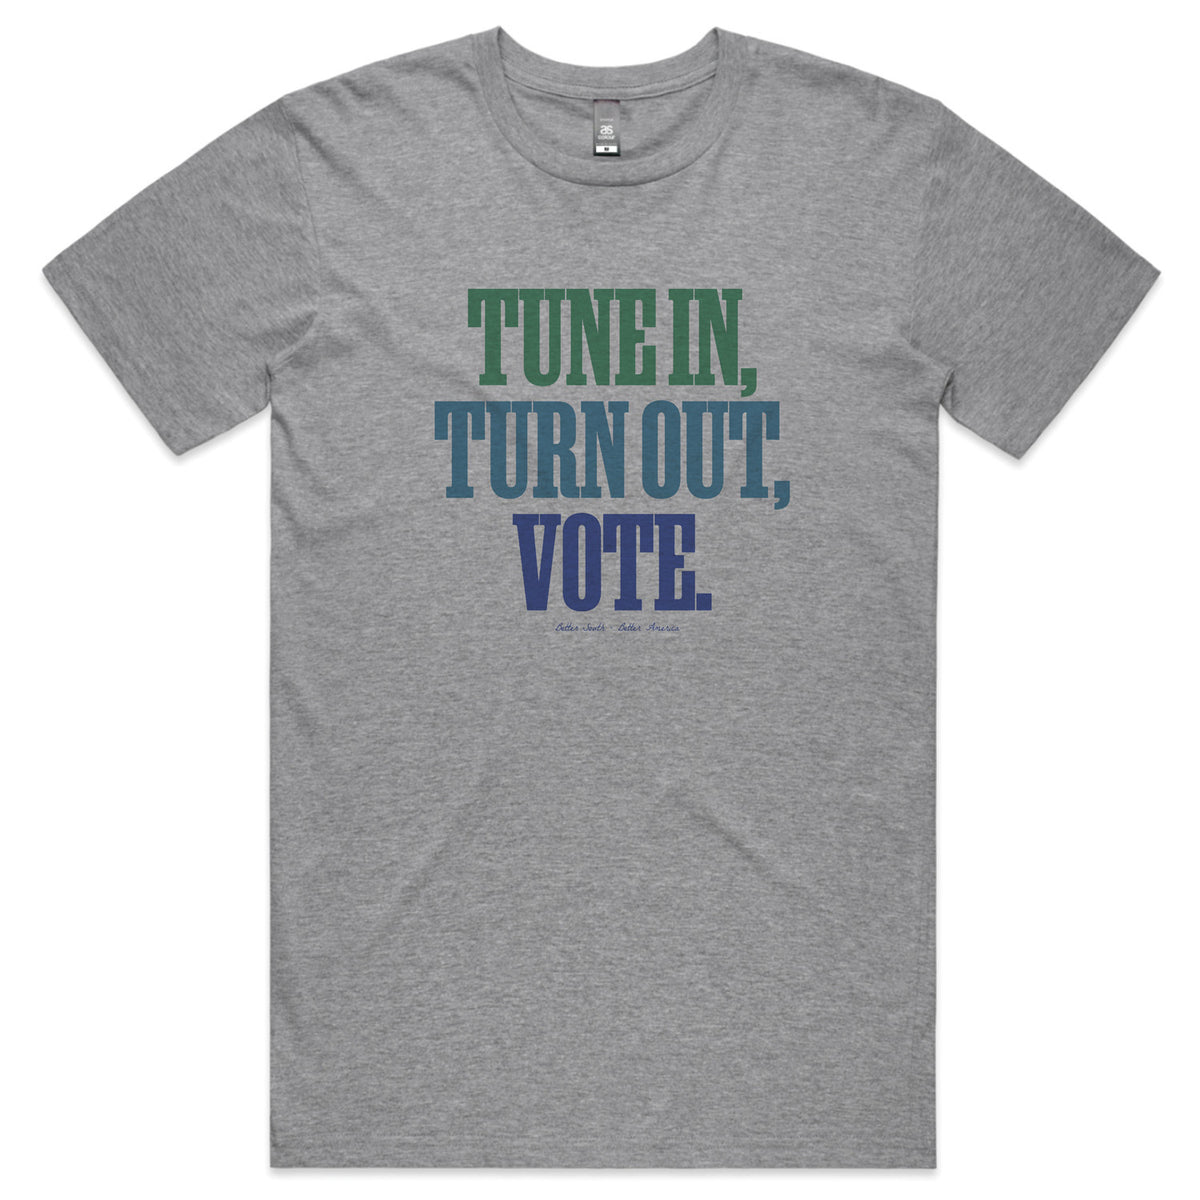 TUNE IN TURN OUT VOTE T-shirt